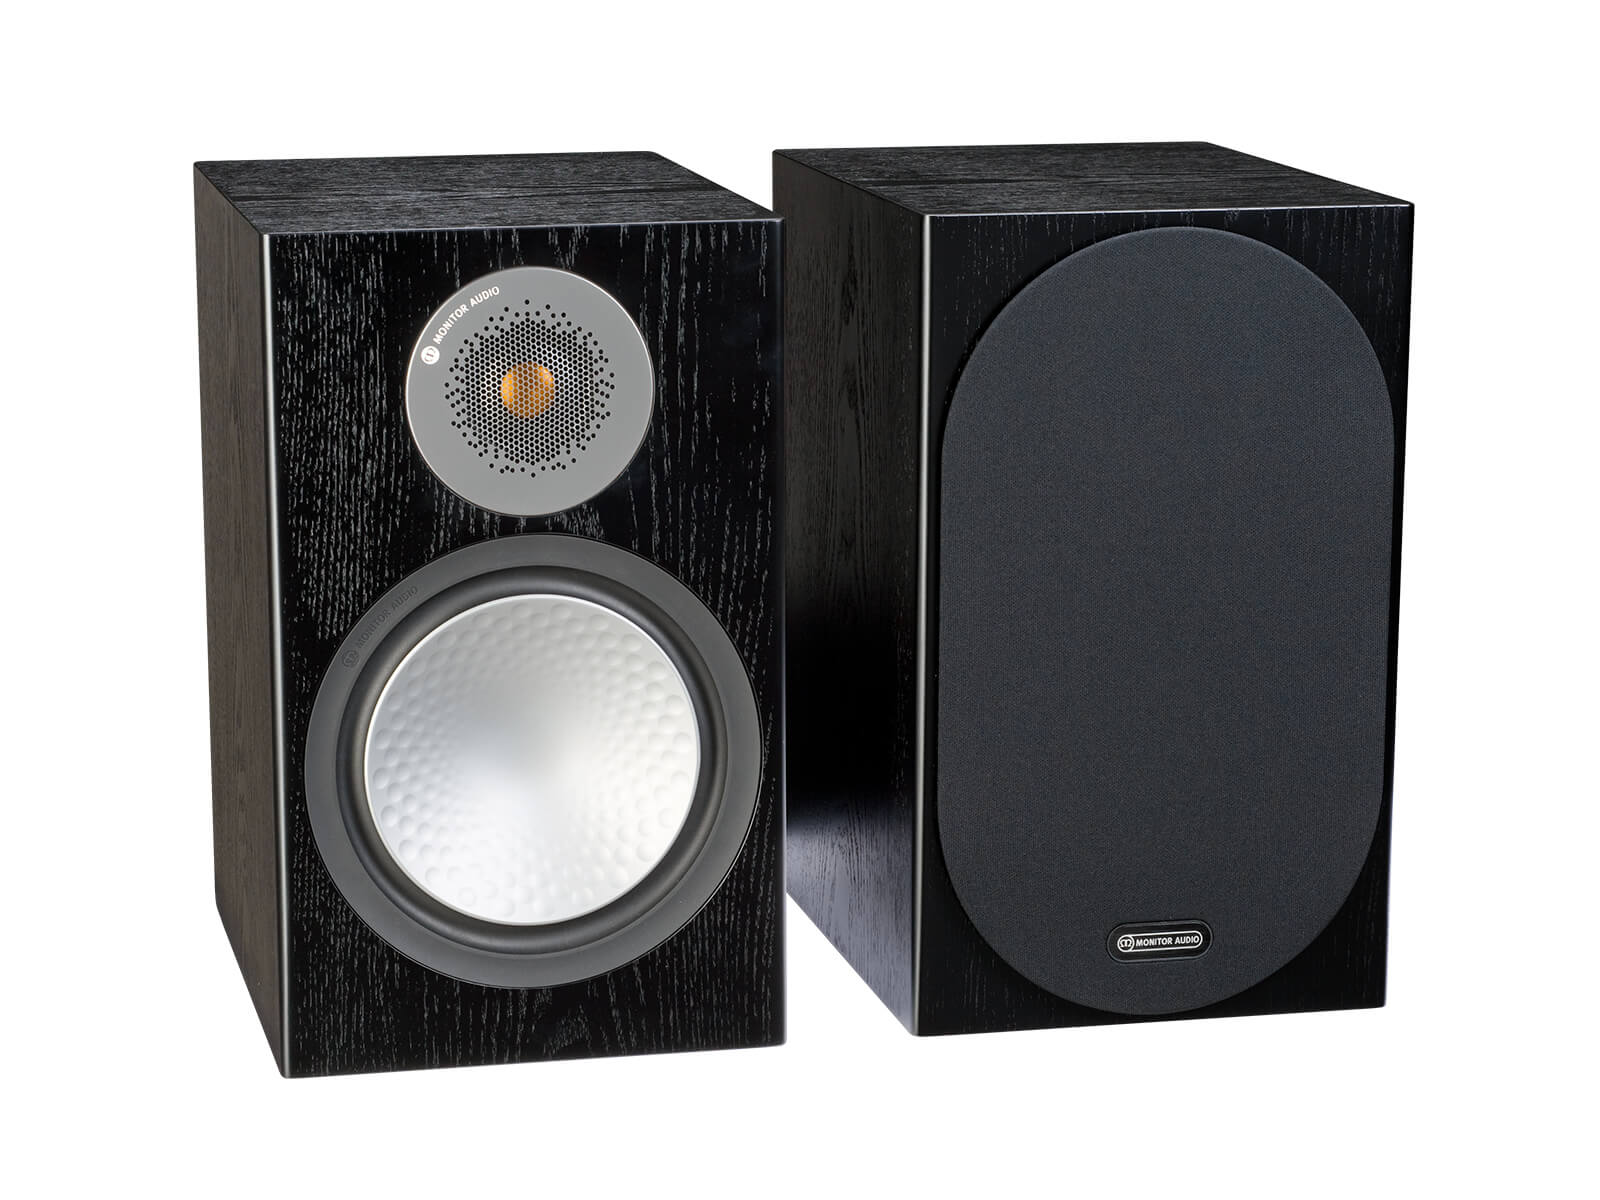 Silver 100, bookshelf speakers, with and without grille in a black oak finish.